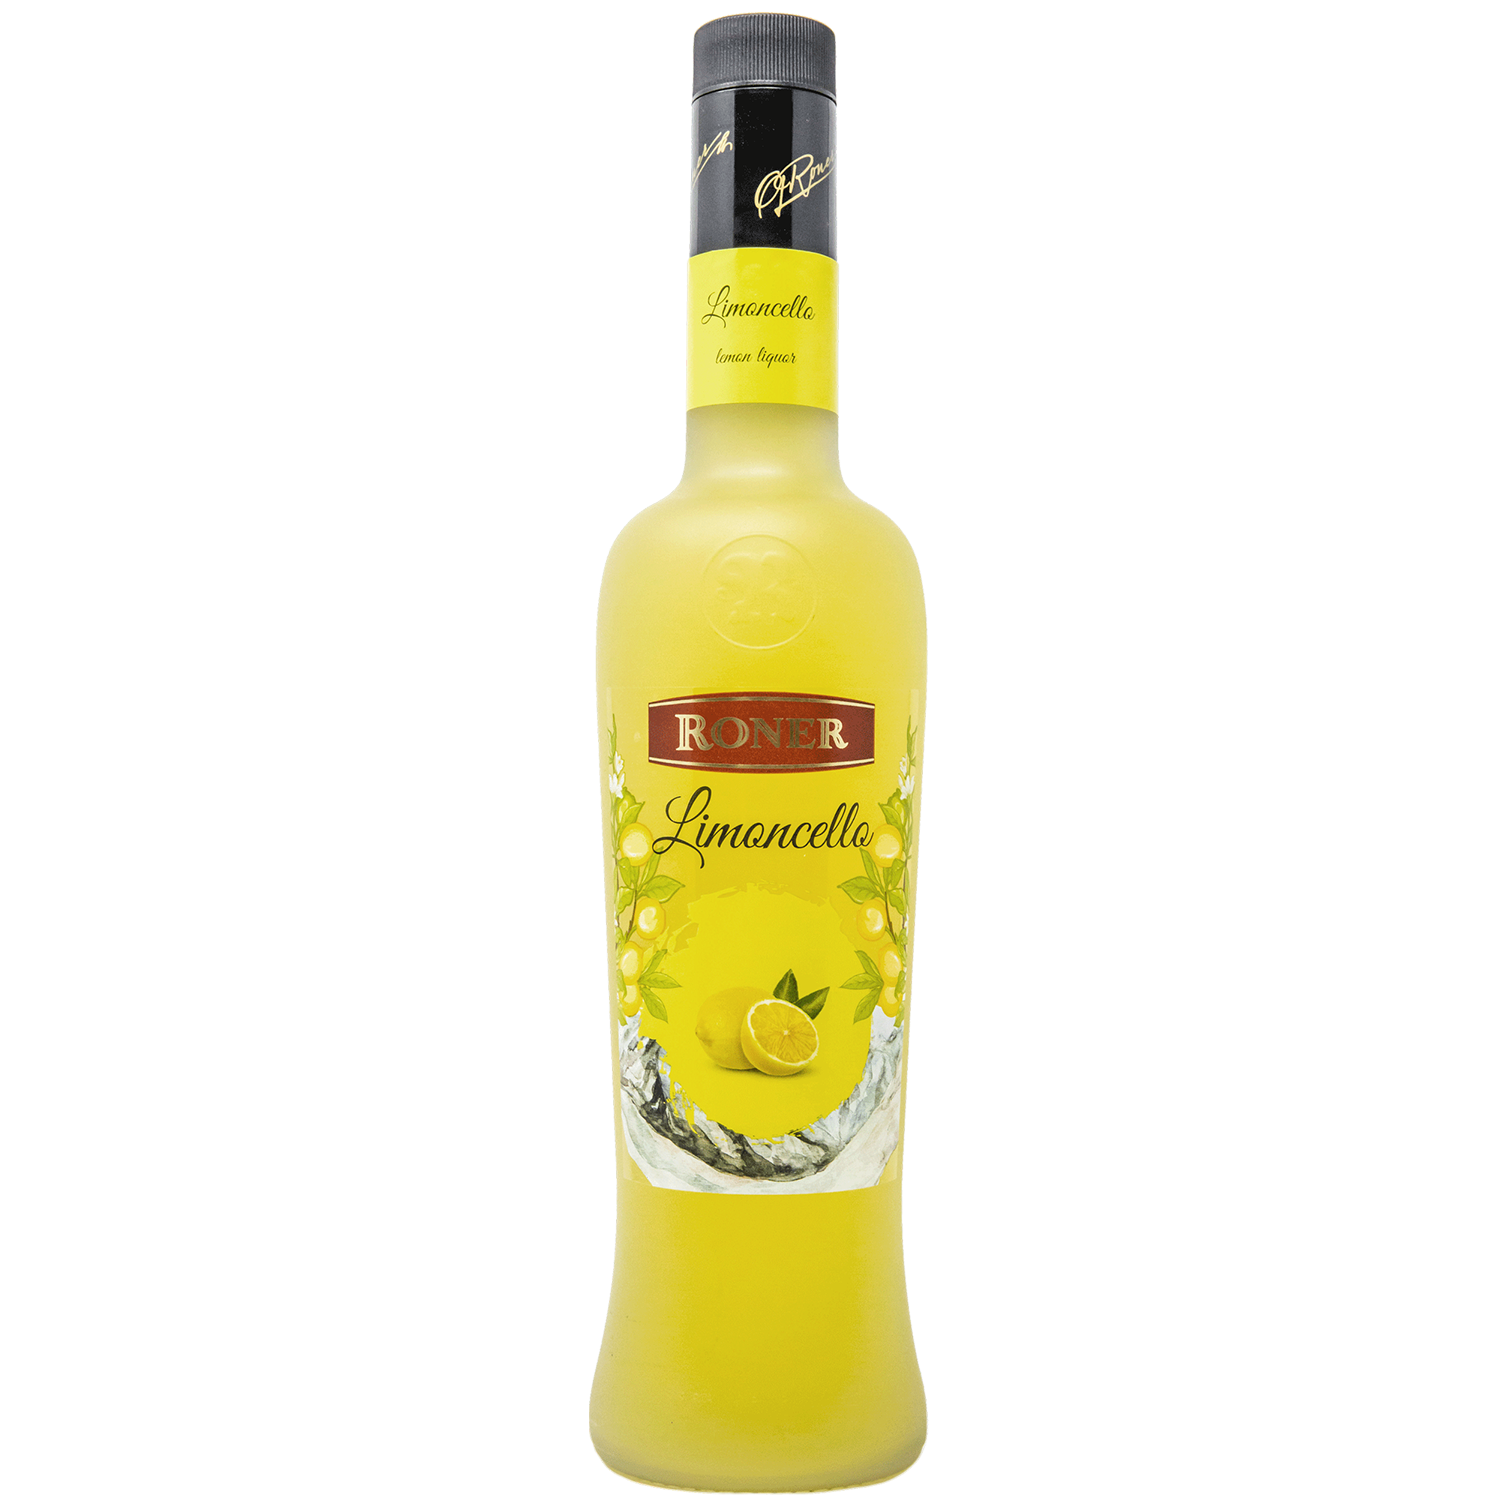 Limoncello by Roner in 700ml bottle